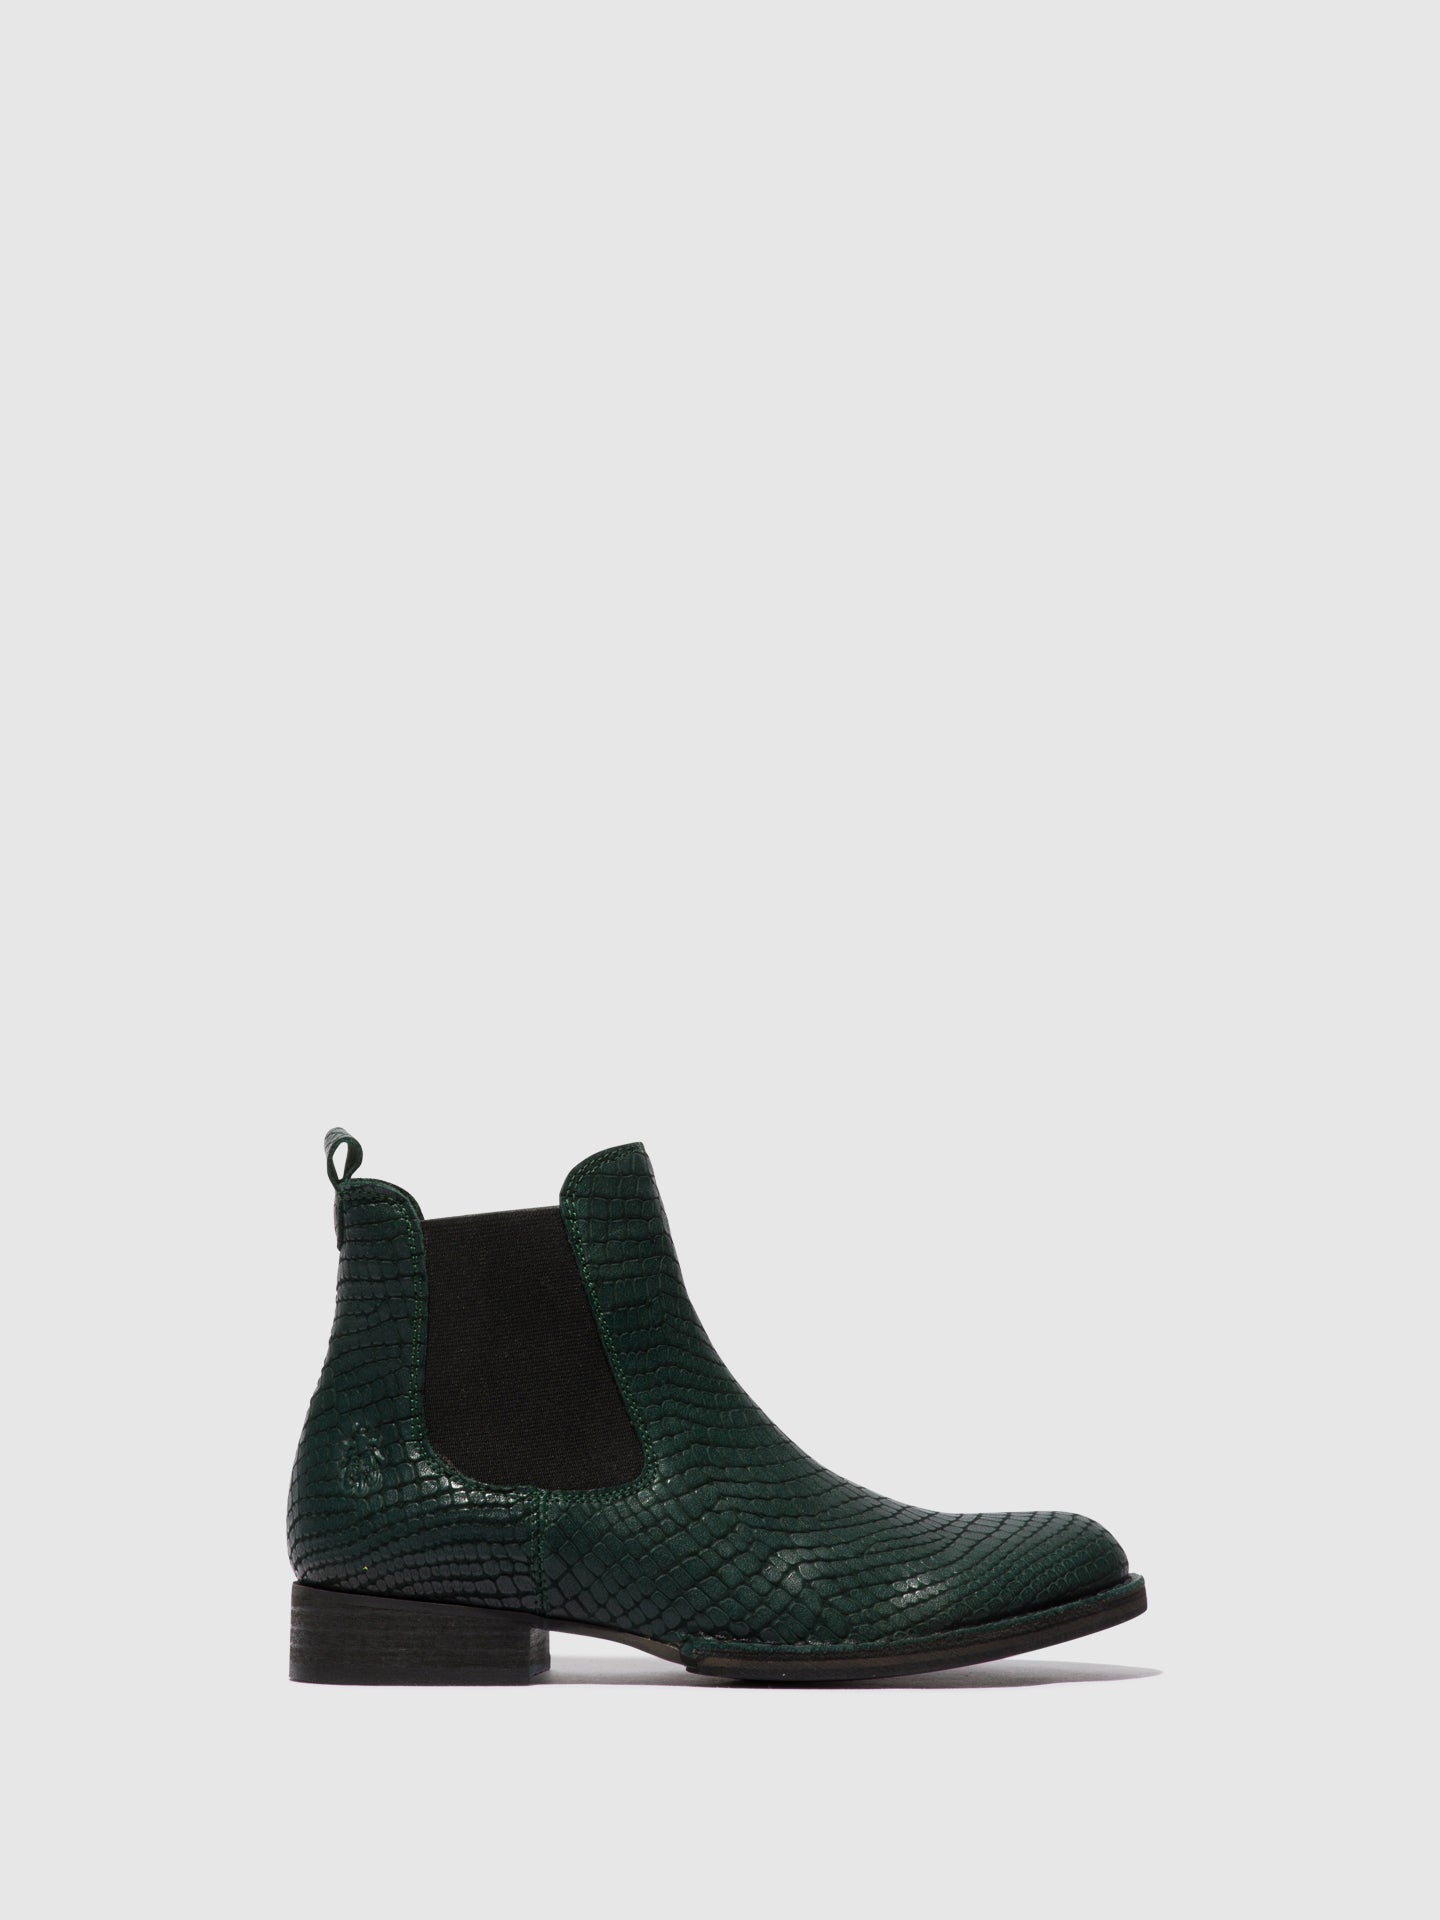 Fly London Botins Chelsea RINO046FLY CROCO GREEN FOREST